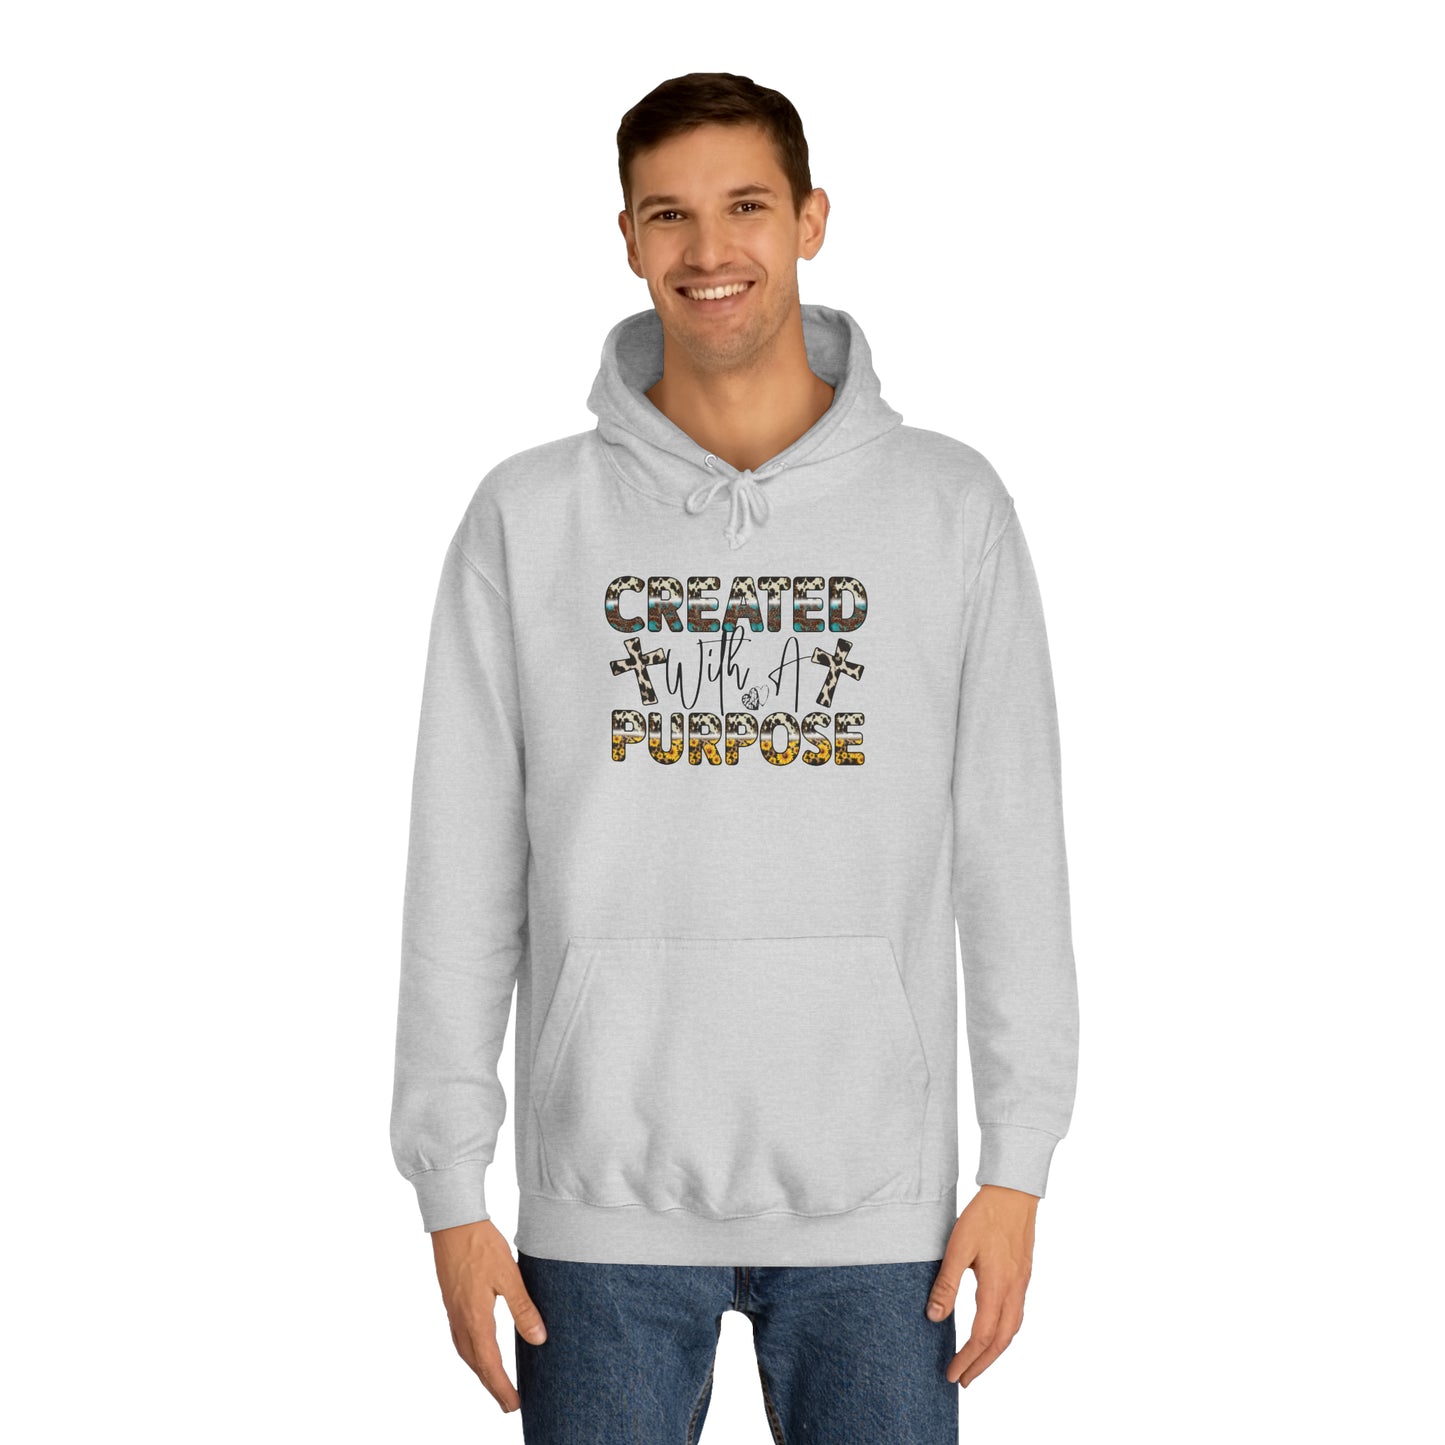 Unisex College Hoodie - Created with a Purpose